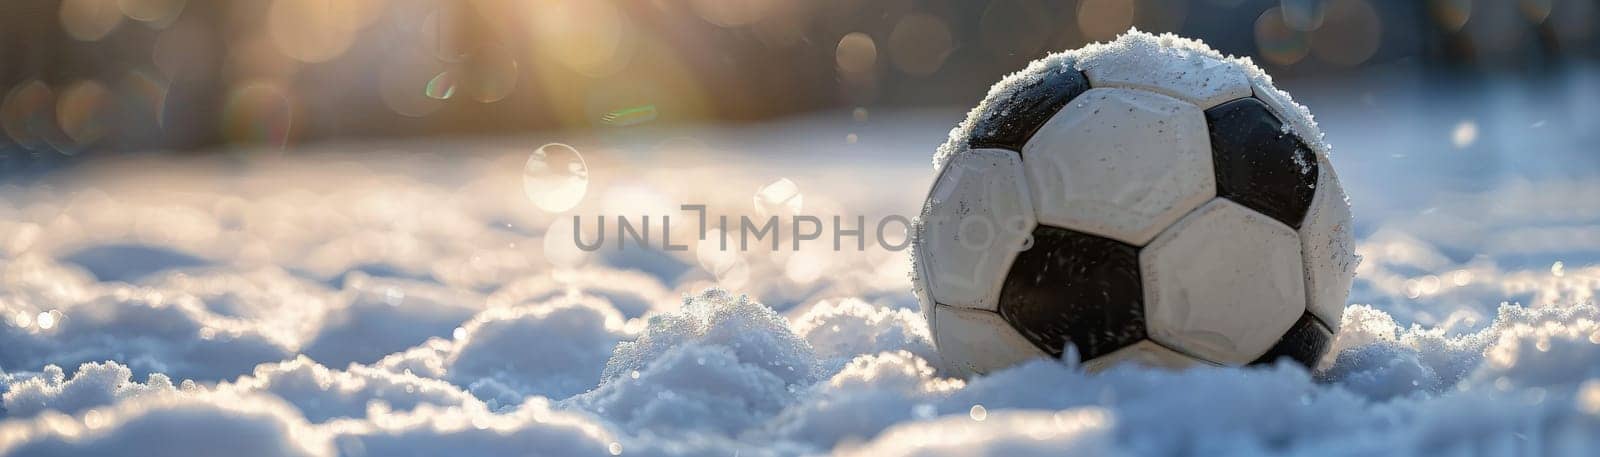 A soccer ball is sitting in the snow. The image has a peaceful and serene mood